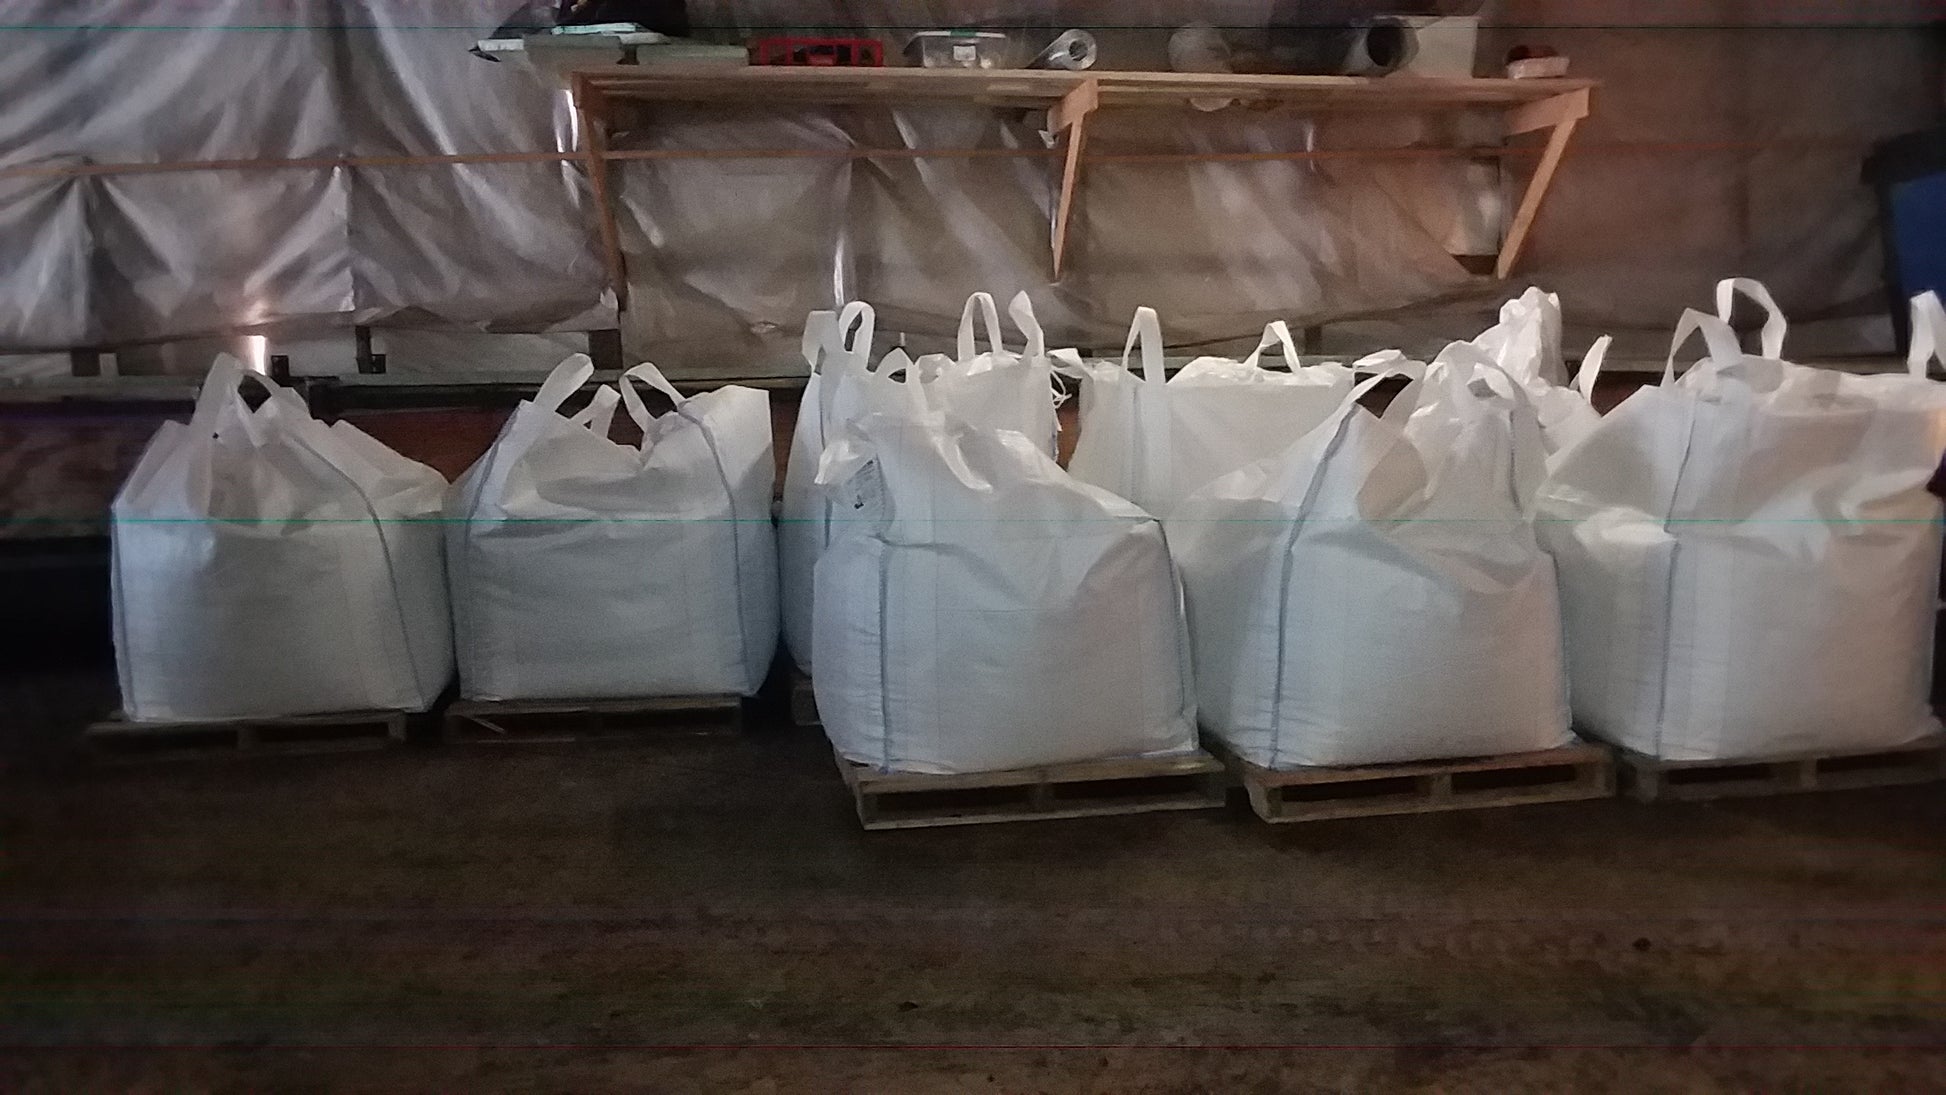 8 Super sack cubic yard totes of Devine Gardens vermicompost worm castings